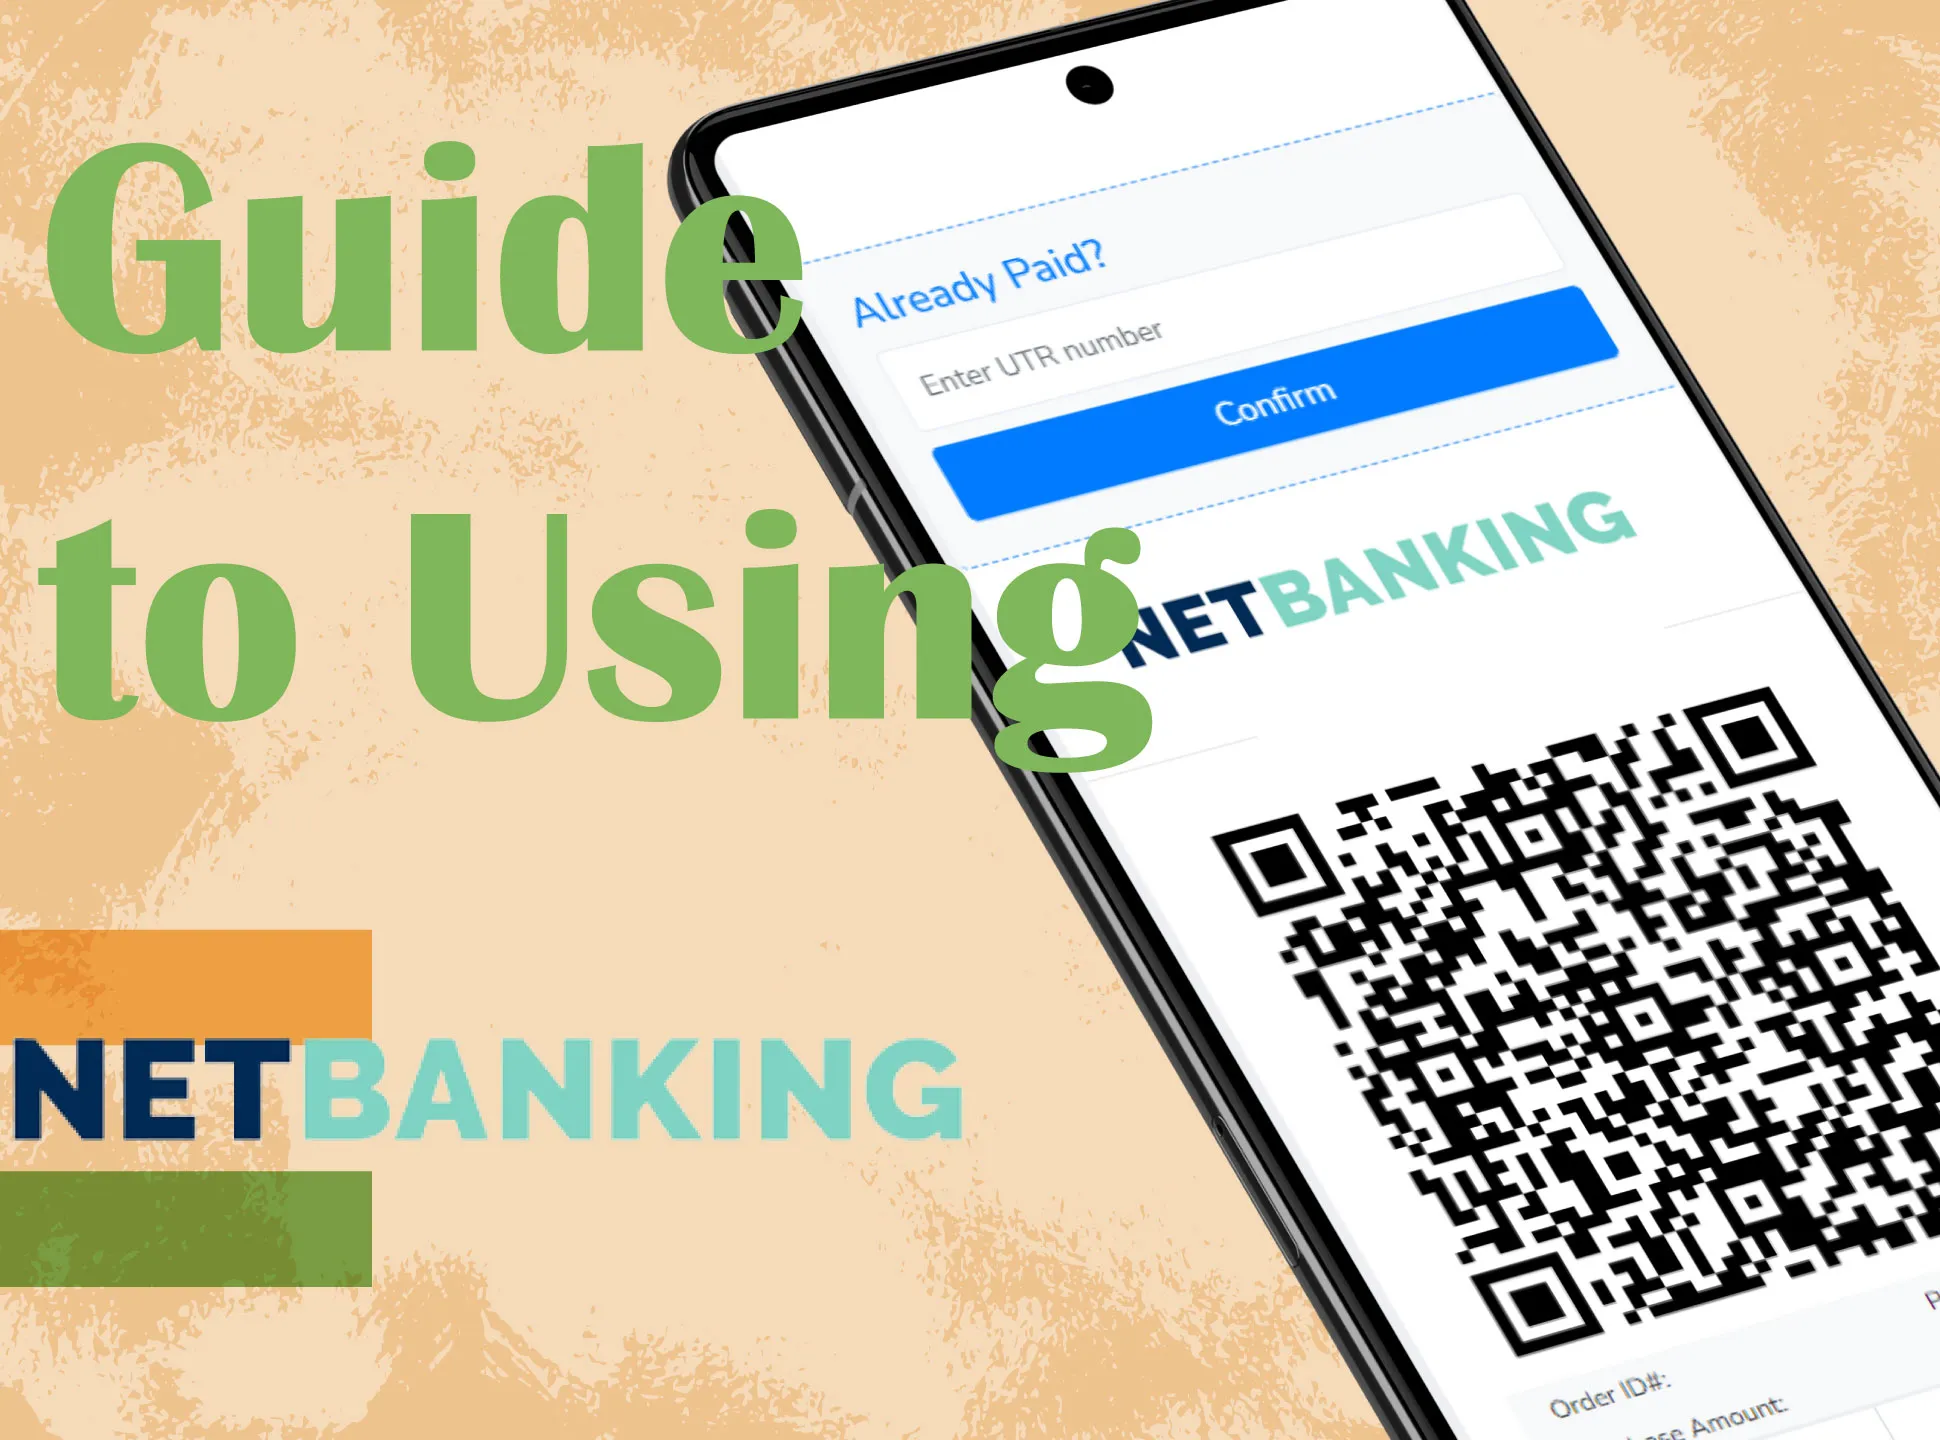 Go to your bank website and create the account to use NetBanking.